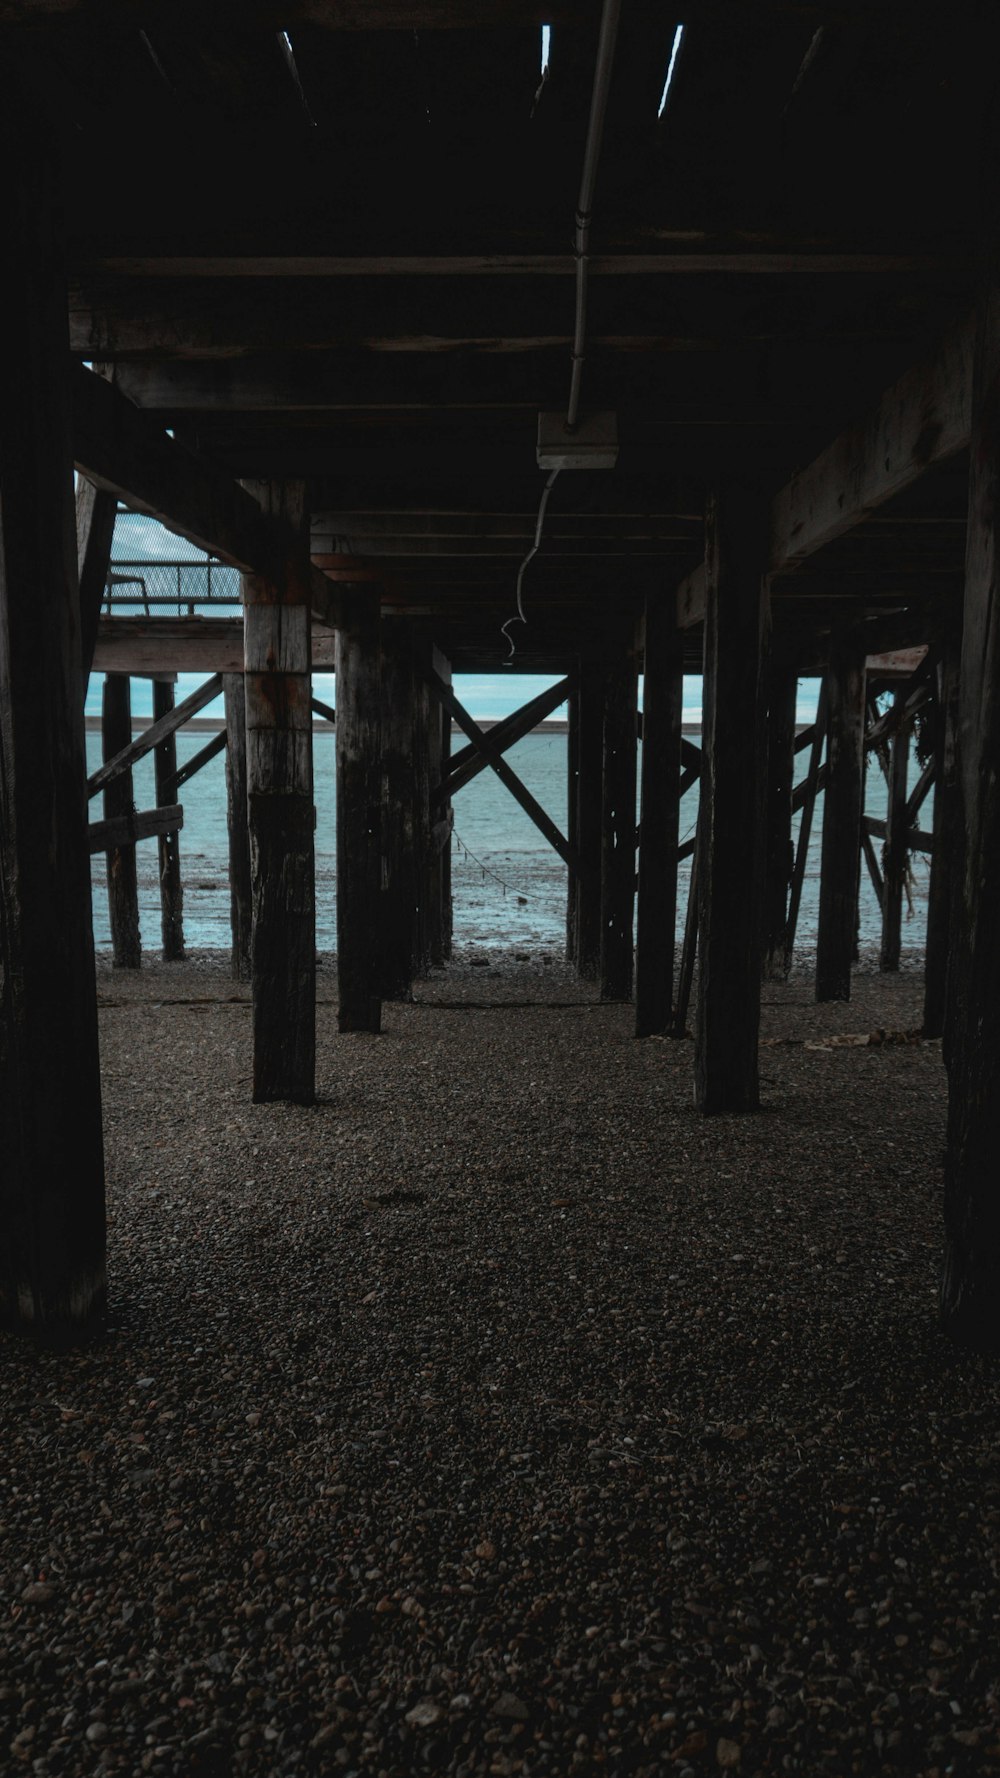 a view of the ocean from underneath a pier